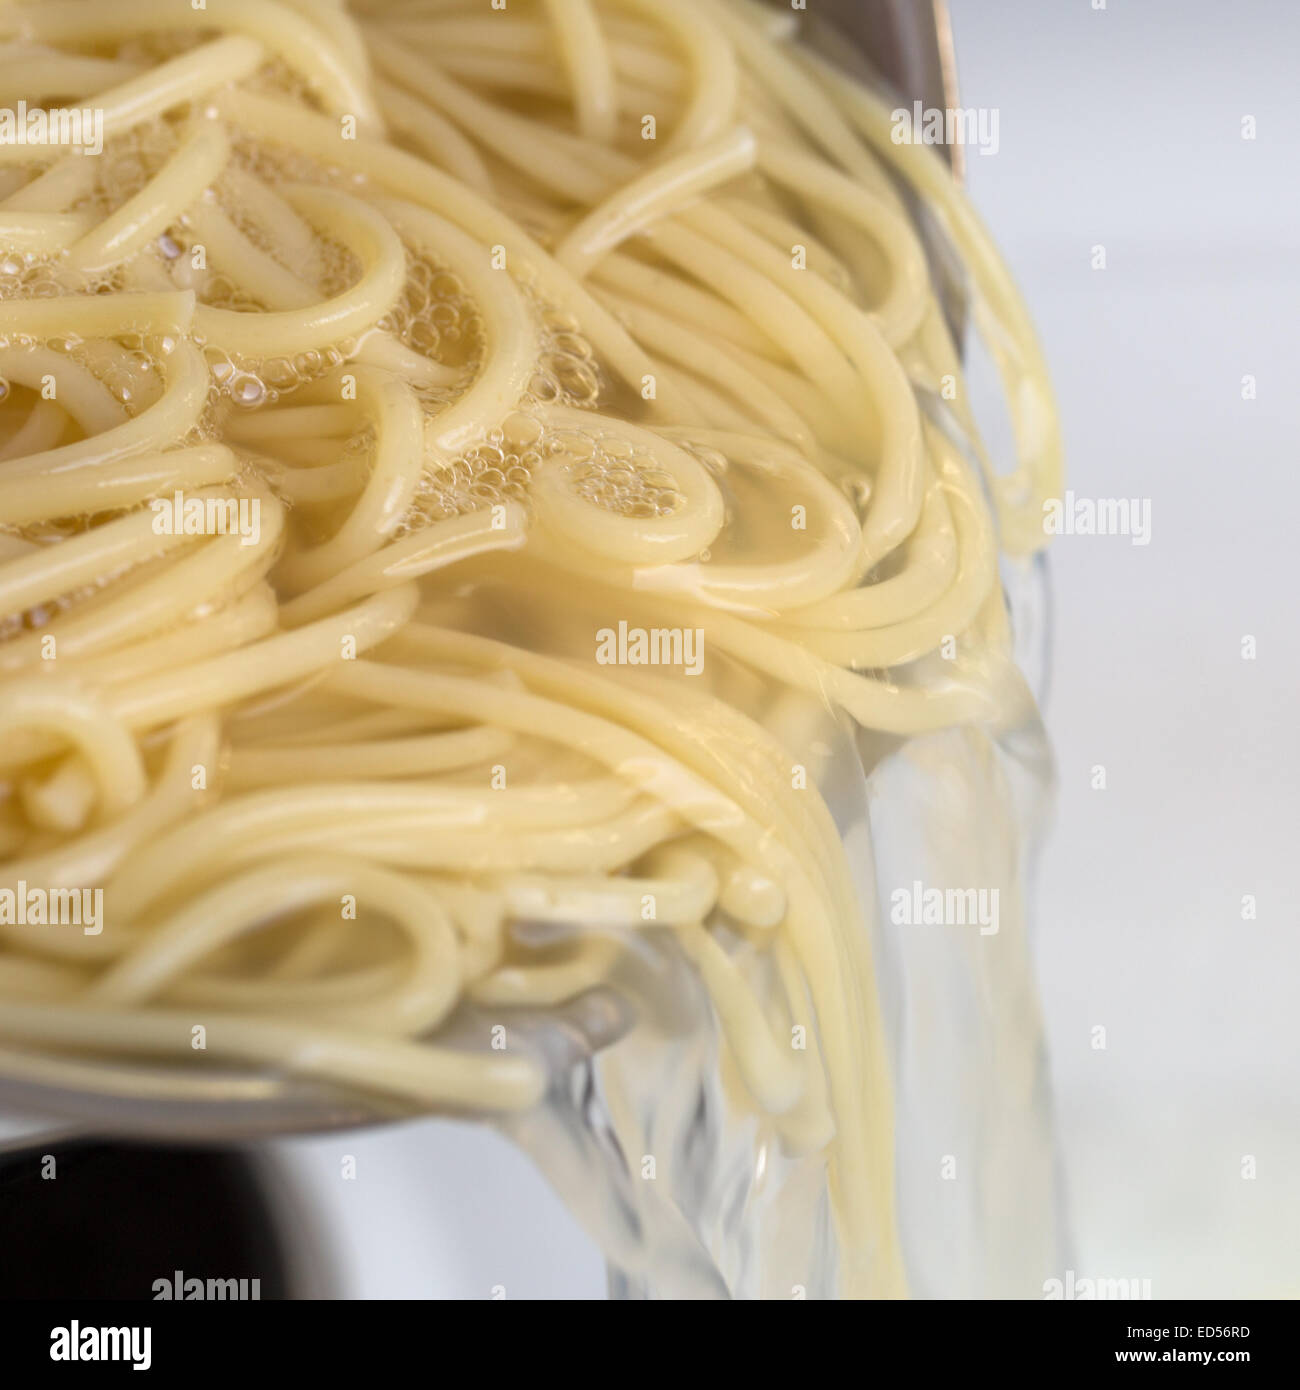 Cooking spaghetti noodles food meal strain the pasta from hot water Stock Photo